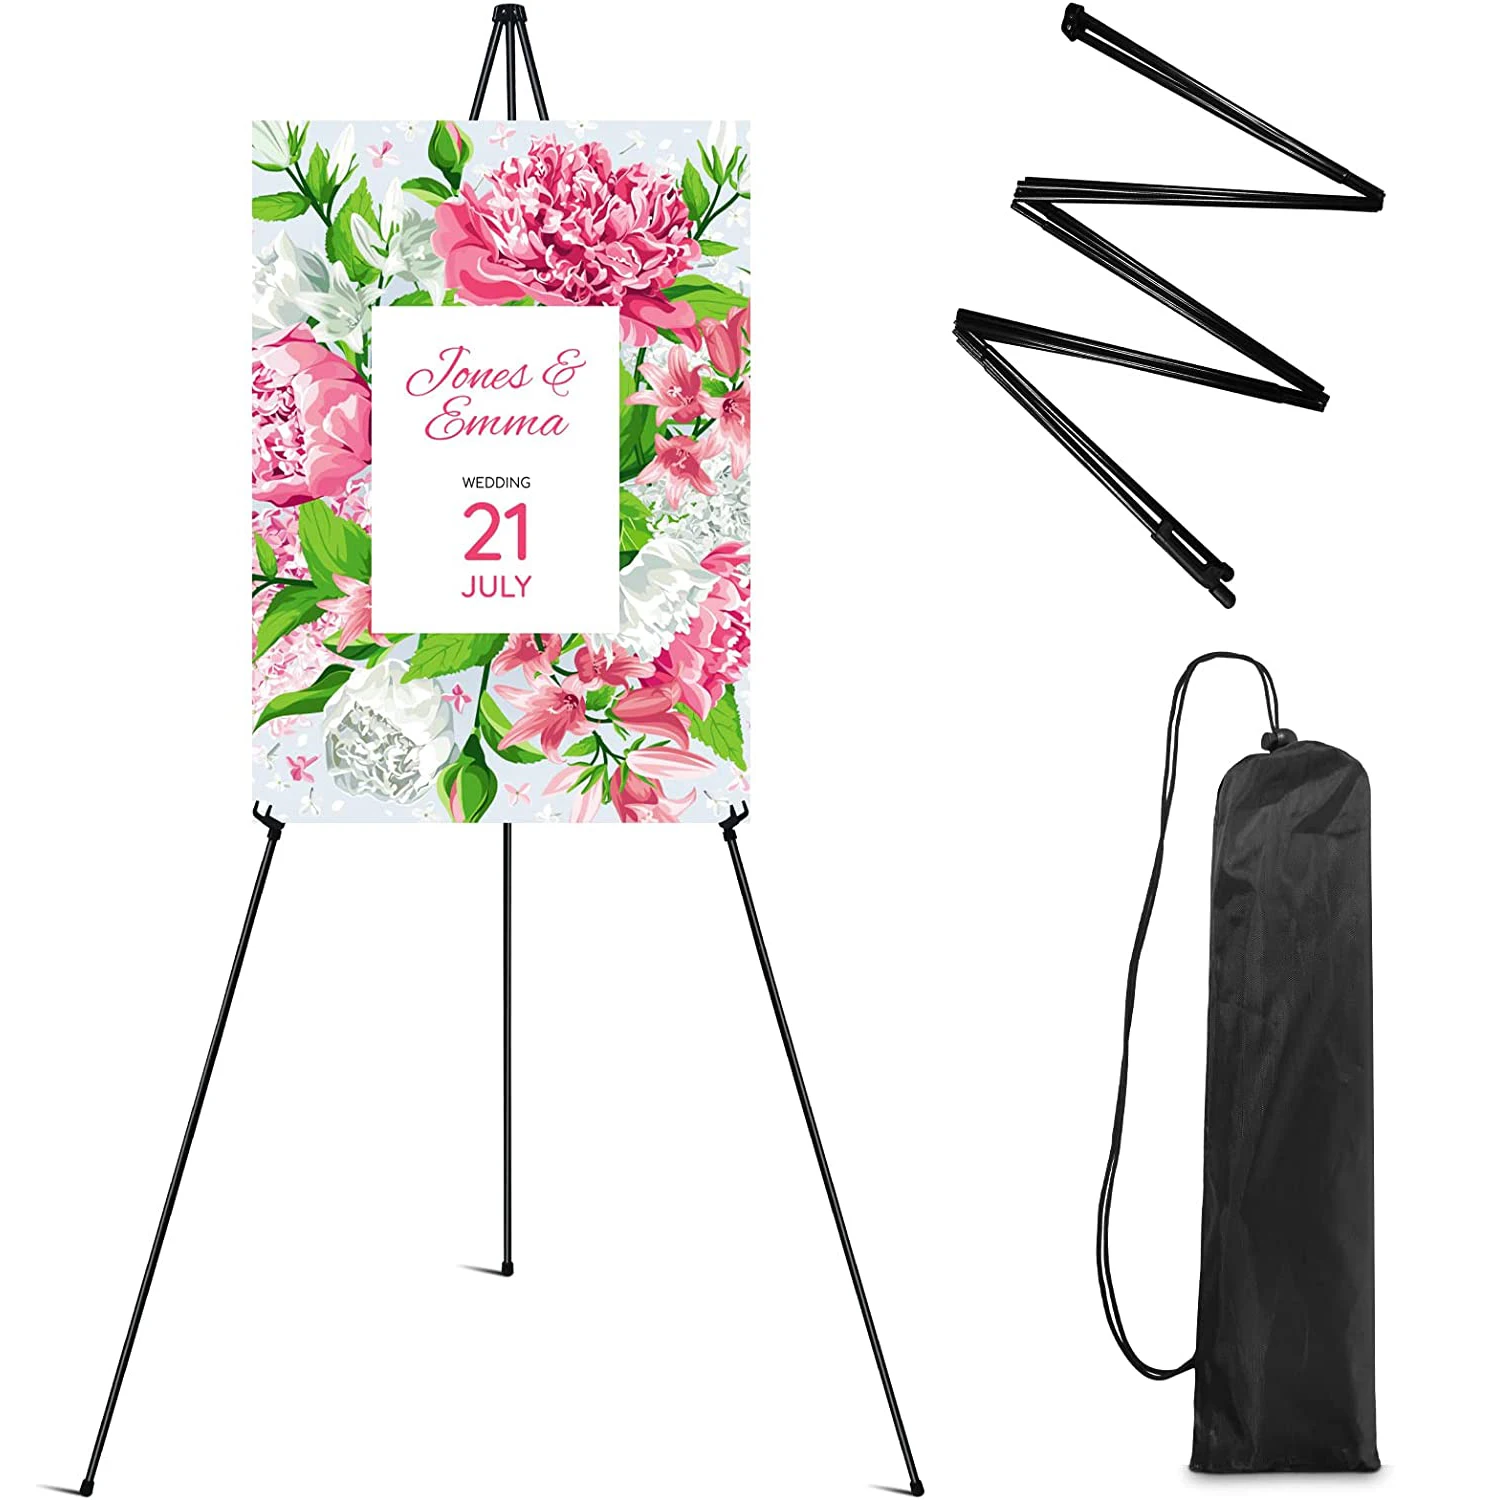  Display Easel Stand for Wedding Sign, 63 Folding Art Easel  with Carry Bag, Portable Tripod for Painting, Posters, Signs, Artwork &  Trade Exhibitions, Black (6 Pack)